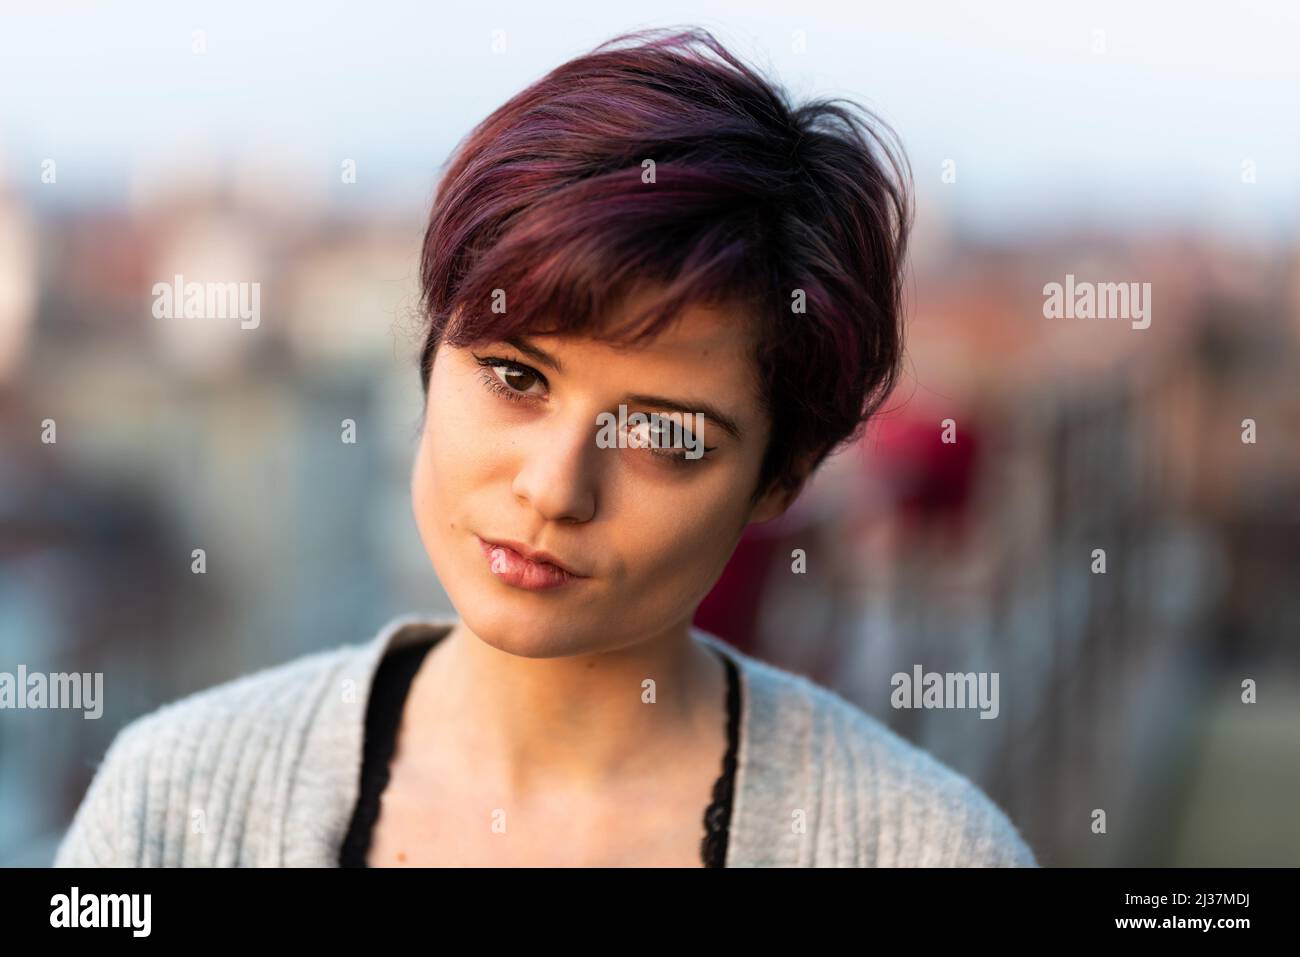 Fashion portrait of a 23 year old white woman with short, dyed hair standing on a terrace, Brussels, Belgium. Stock Photo